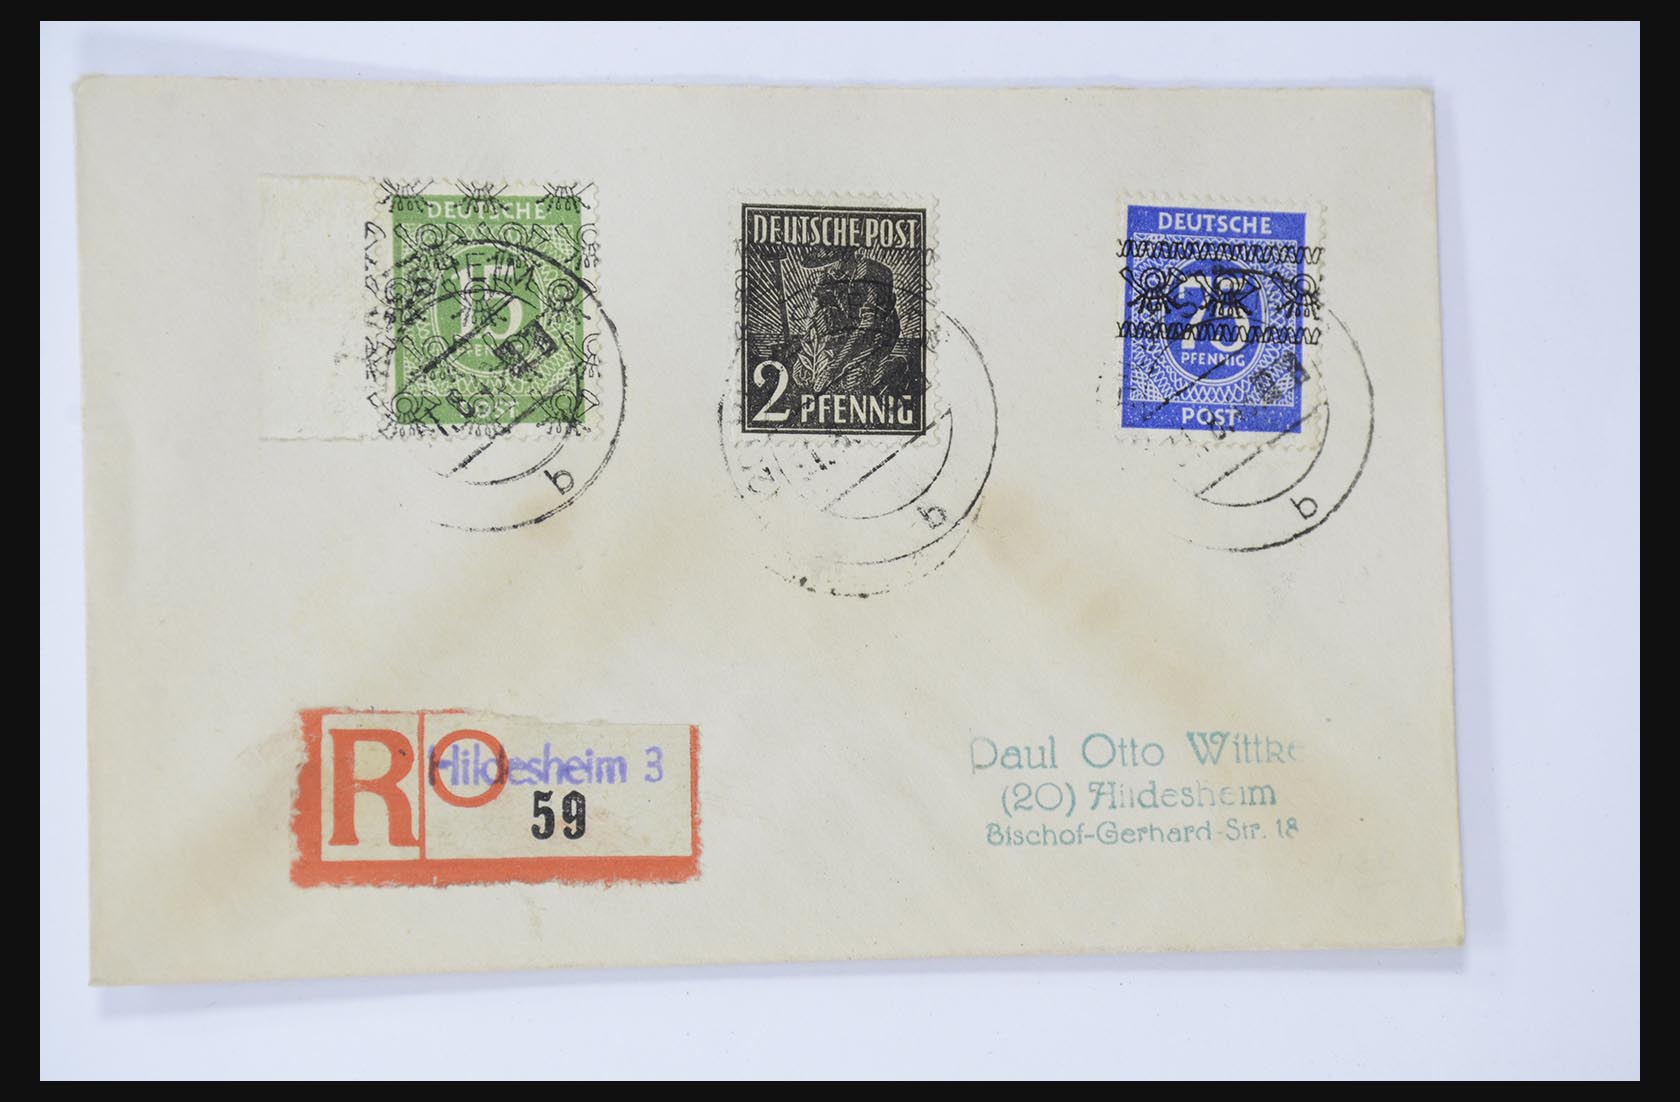 31581 045 - 31581 Germany covers and FDC's 1945-1981.